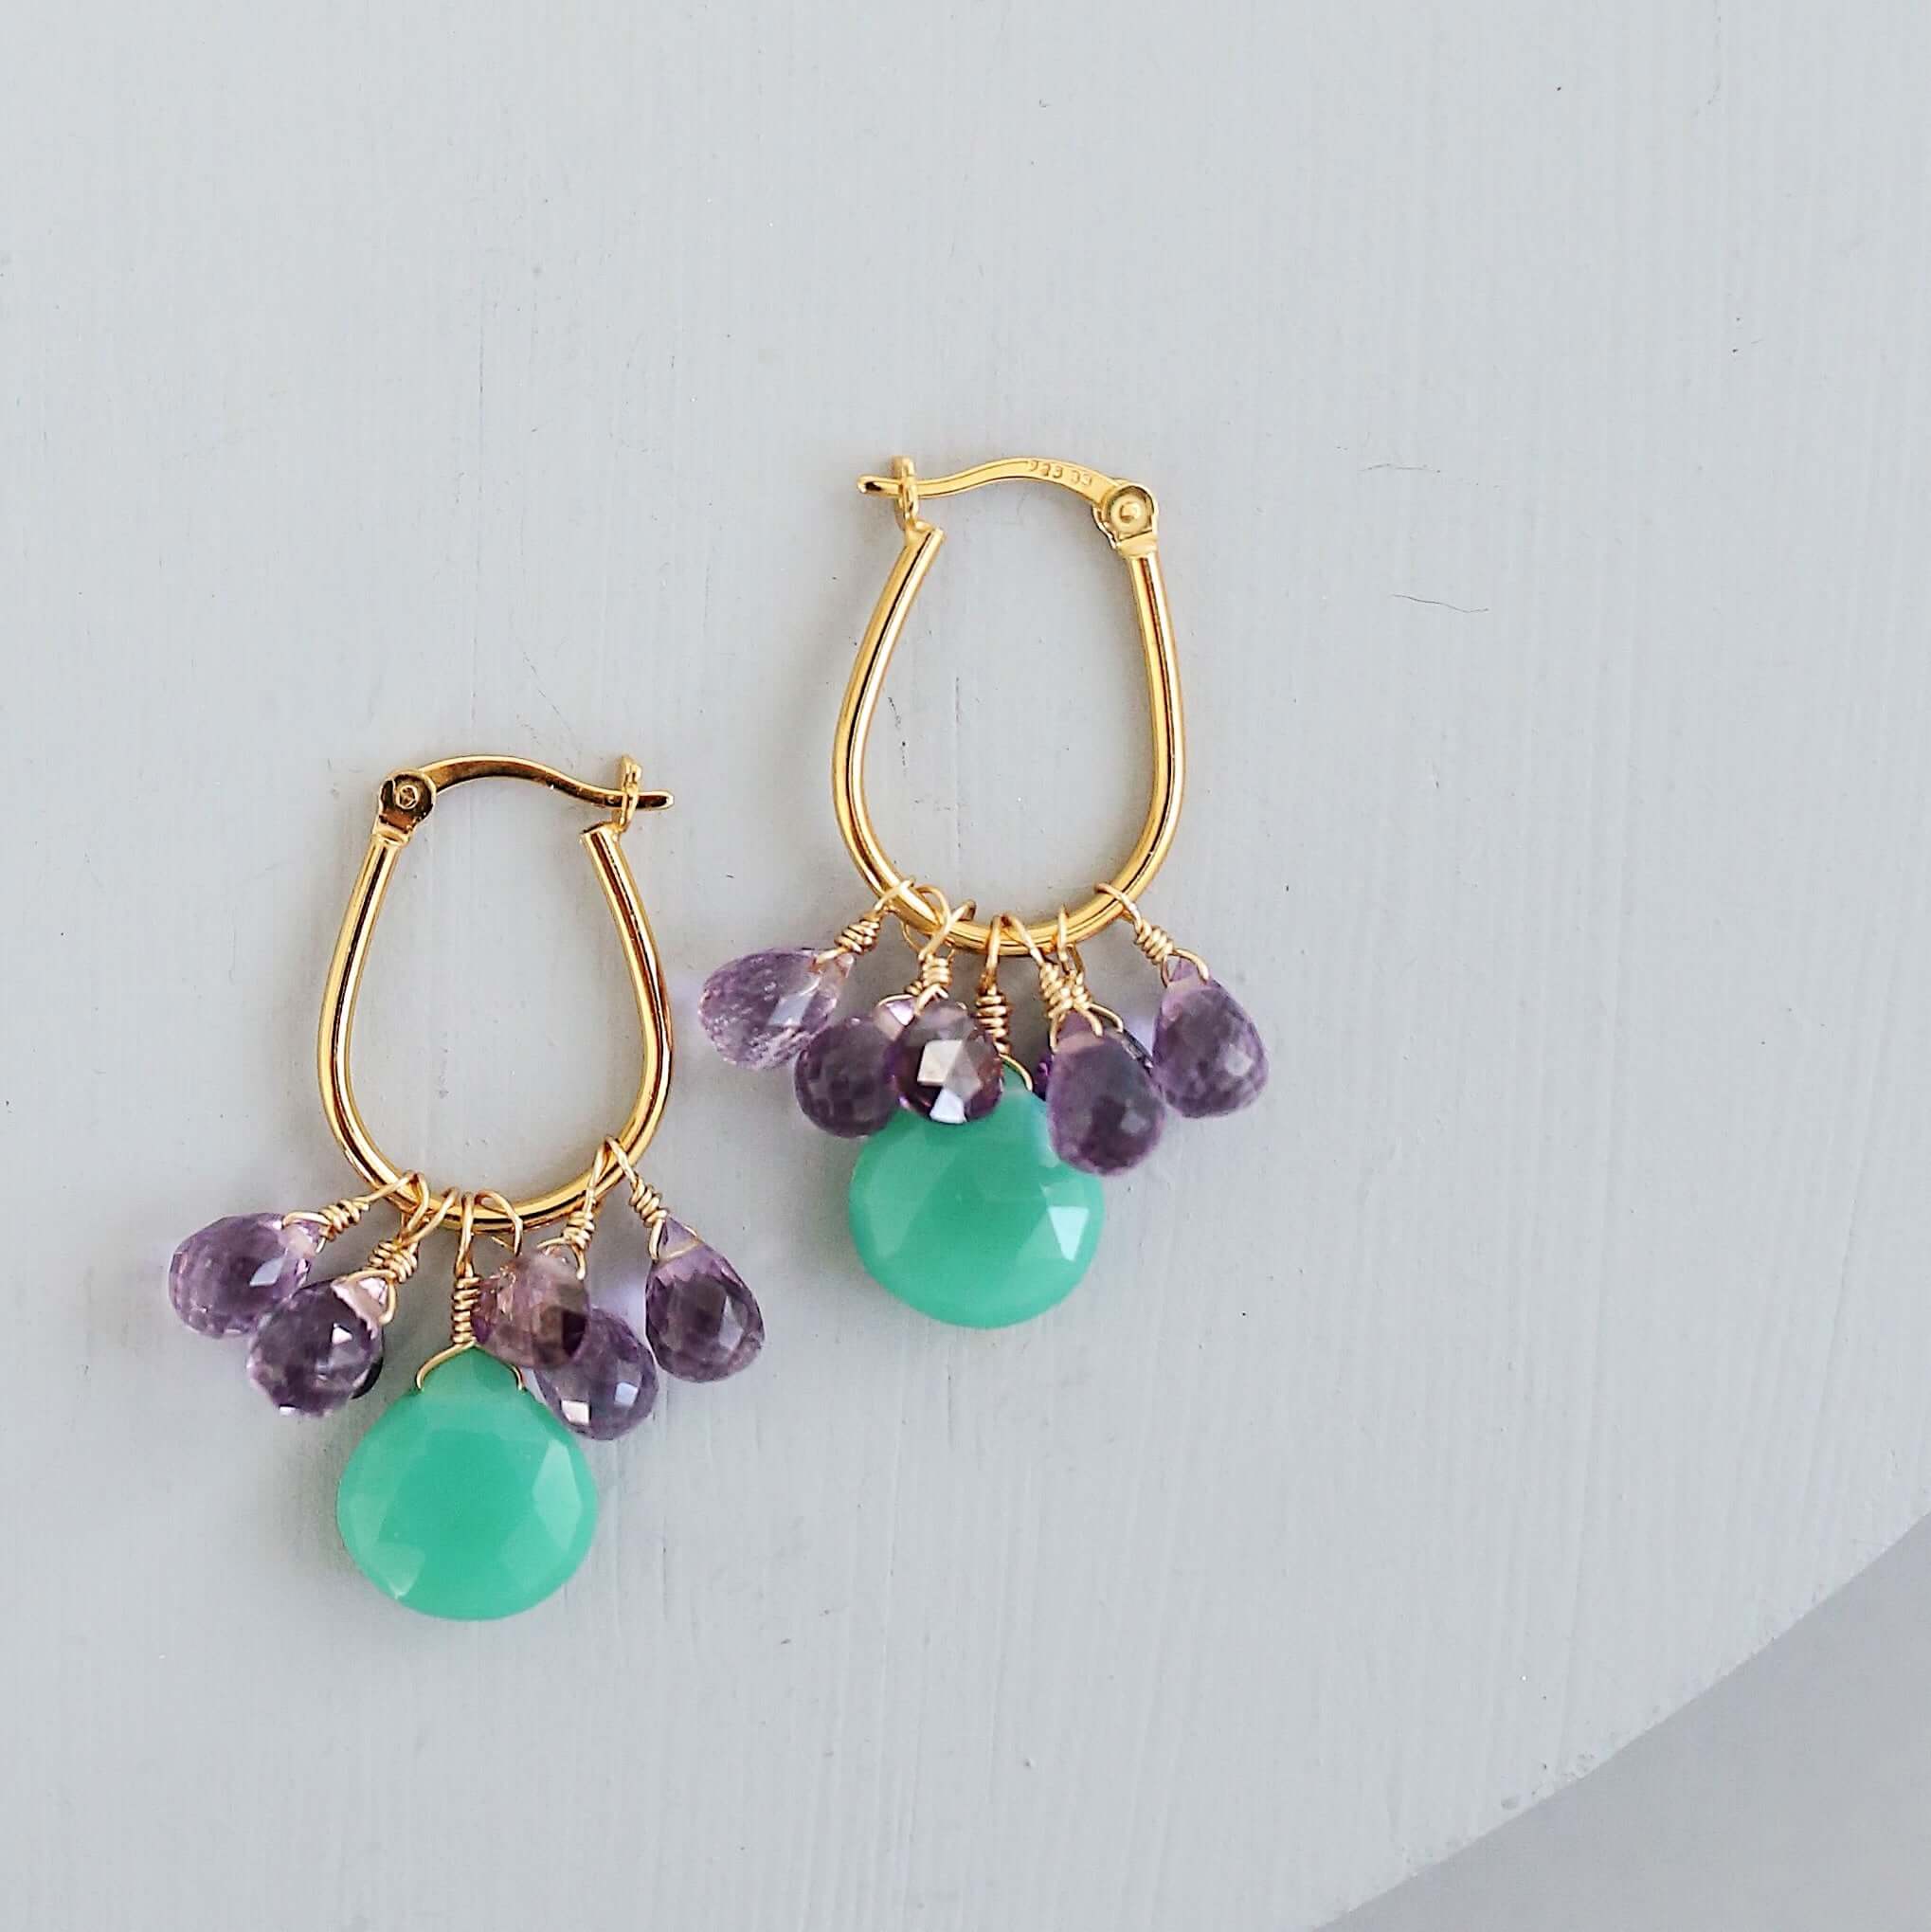 Chrysoprase and Amethyst Earrings - Vibrant Sea Green and Sparkling Purple Hues